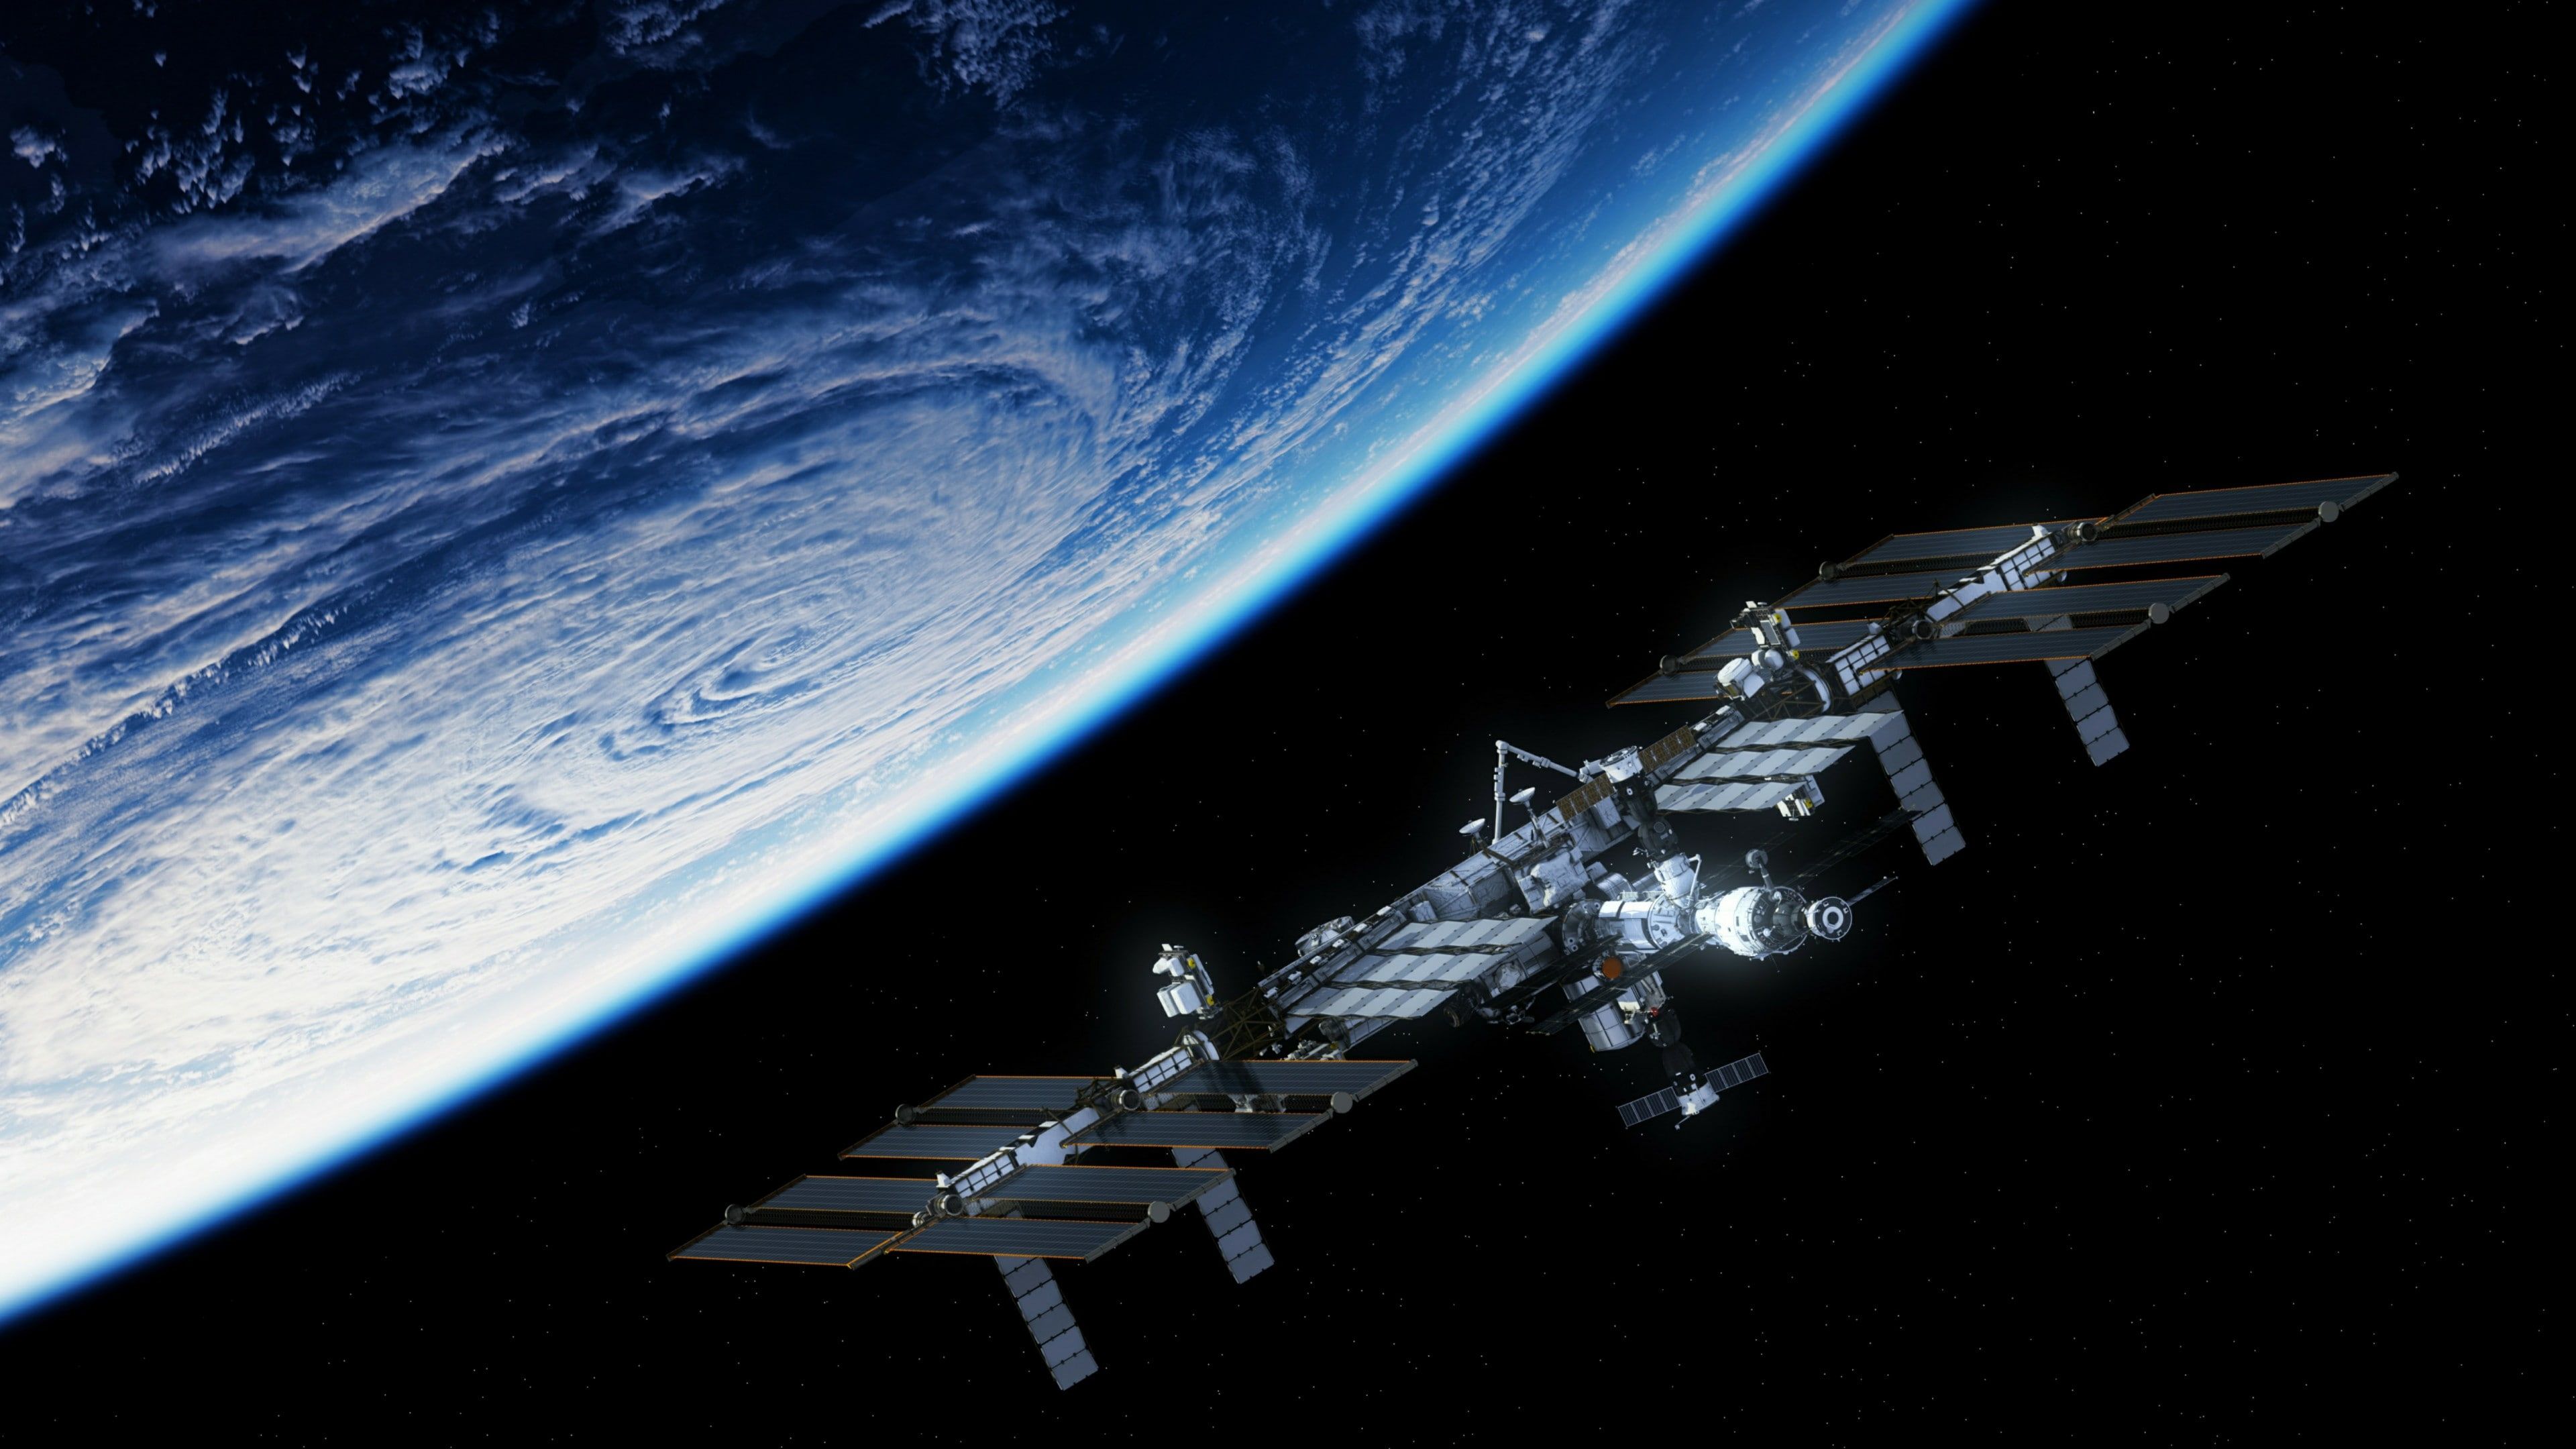 Space Station 4K Wallpaper Free Space Station 4K Background